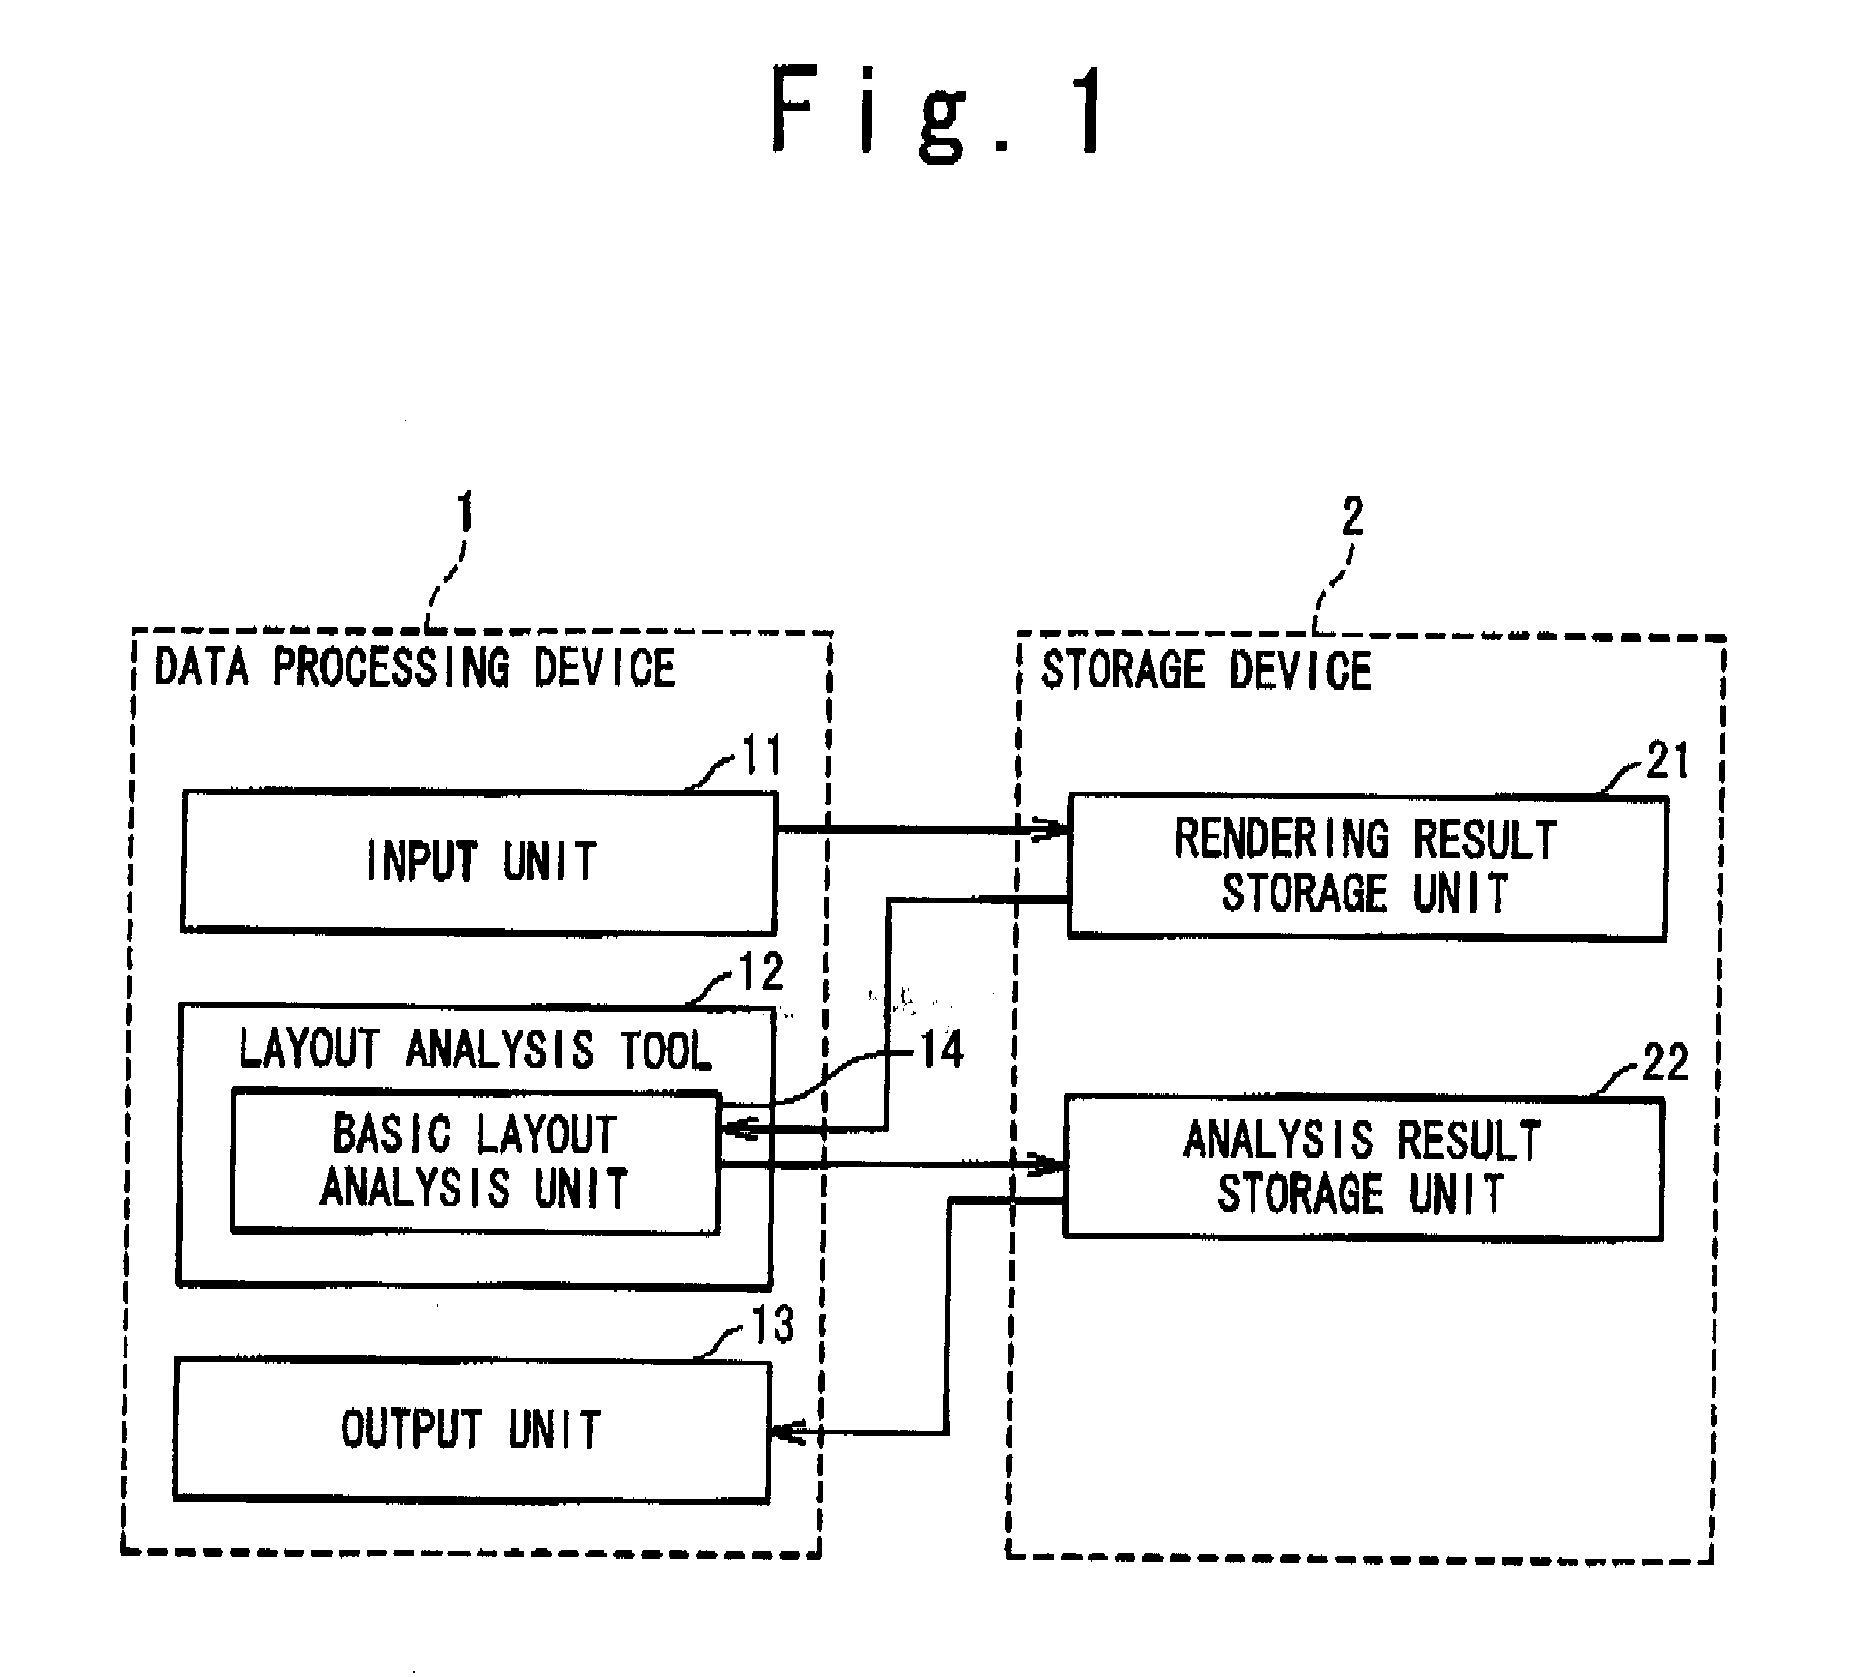 Document Analysis System and Document Adaptation System